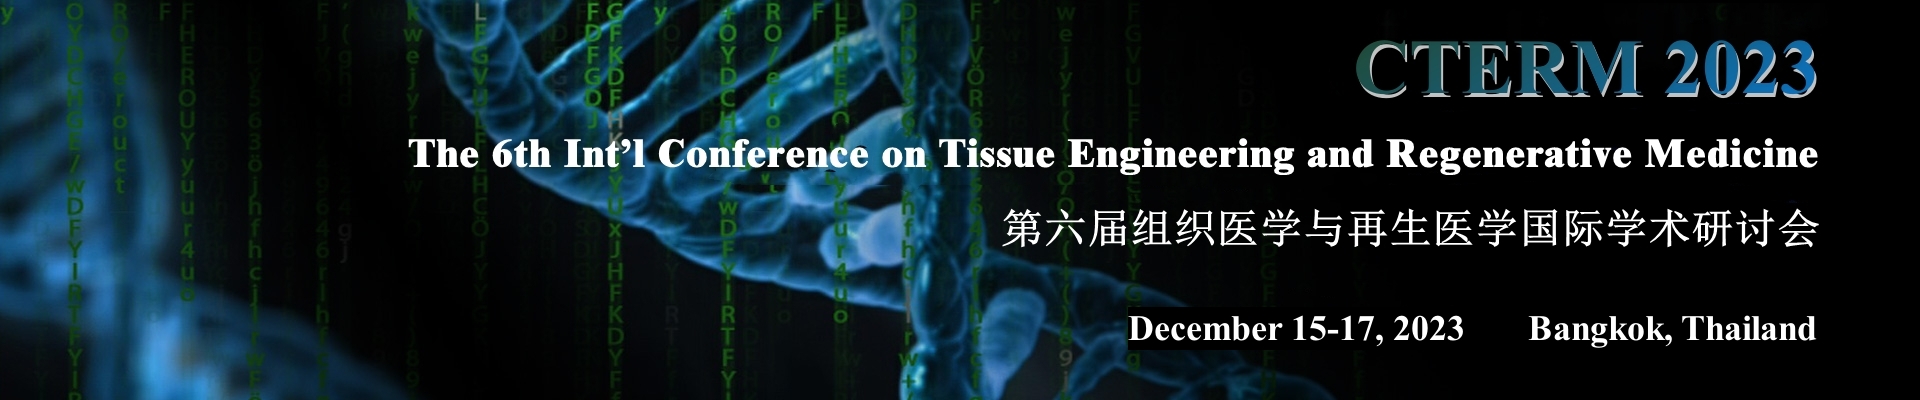 The 6th Int’l Conference on Tissue Engineering and Regenerative Medicine (CTERM 2023)